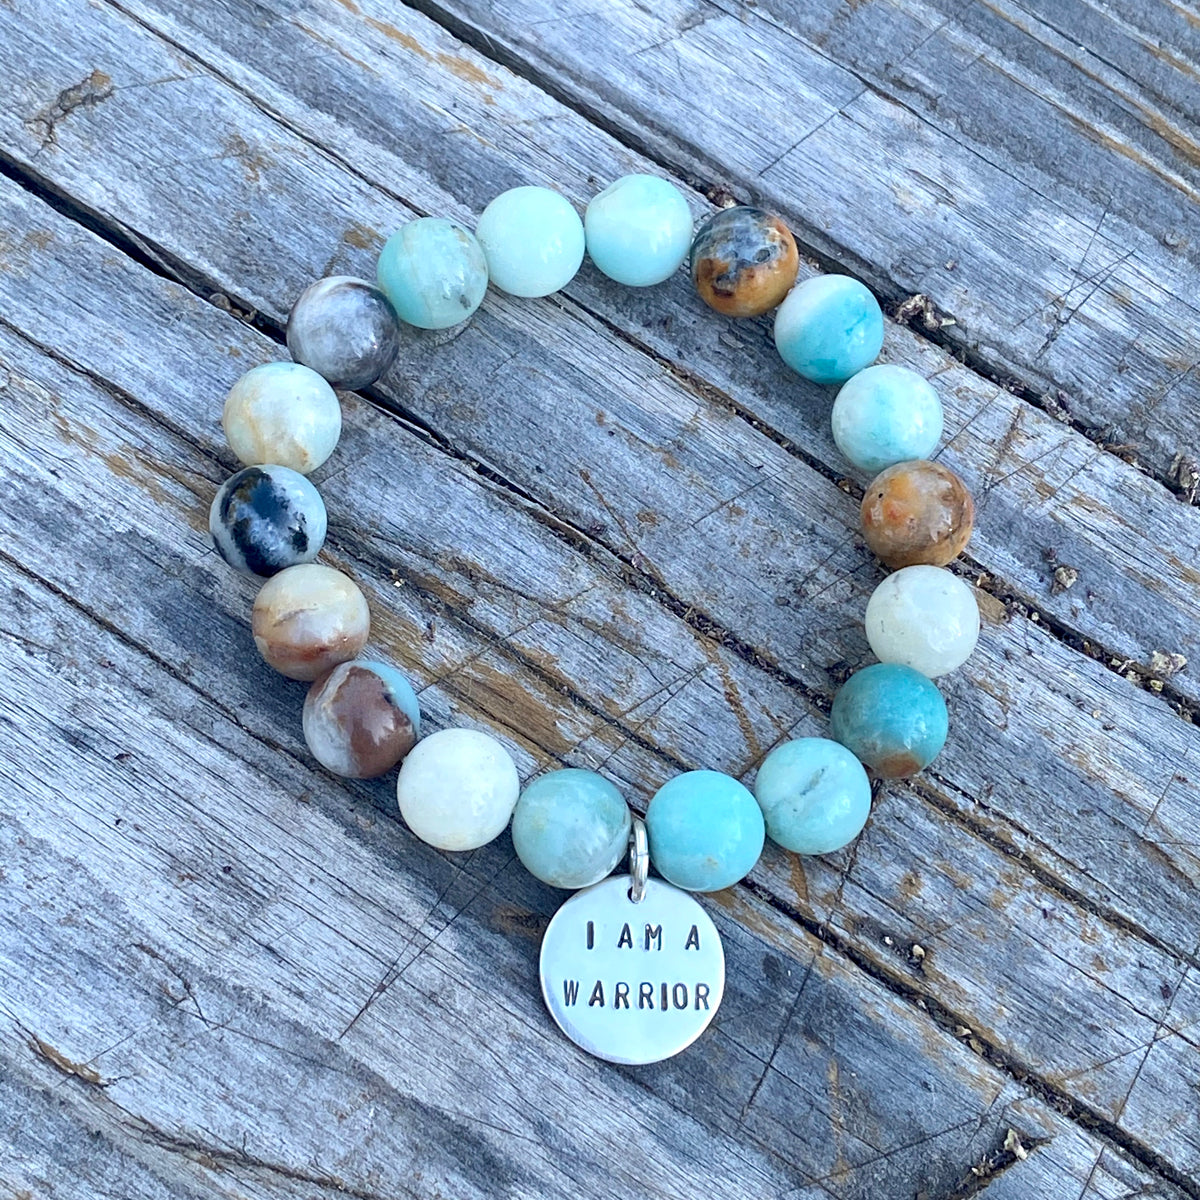 I am a Warrior - Affirmation Bracelet with Amazonite. We all have to fight for something in life.